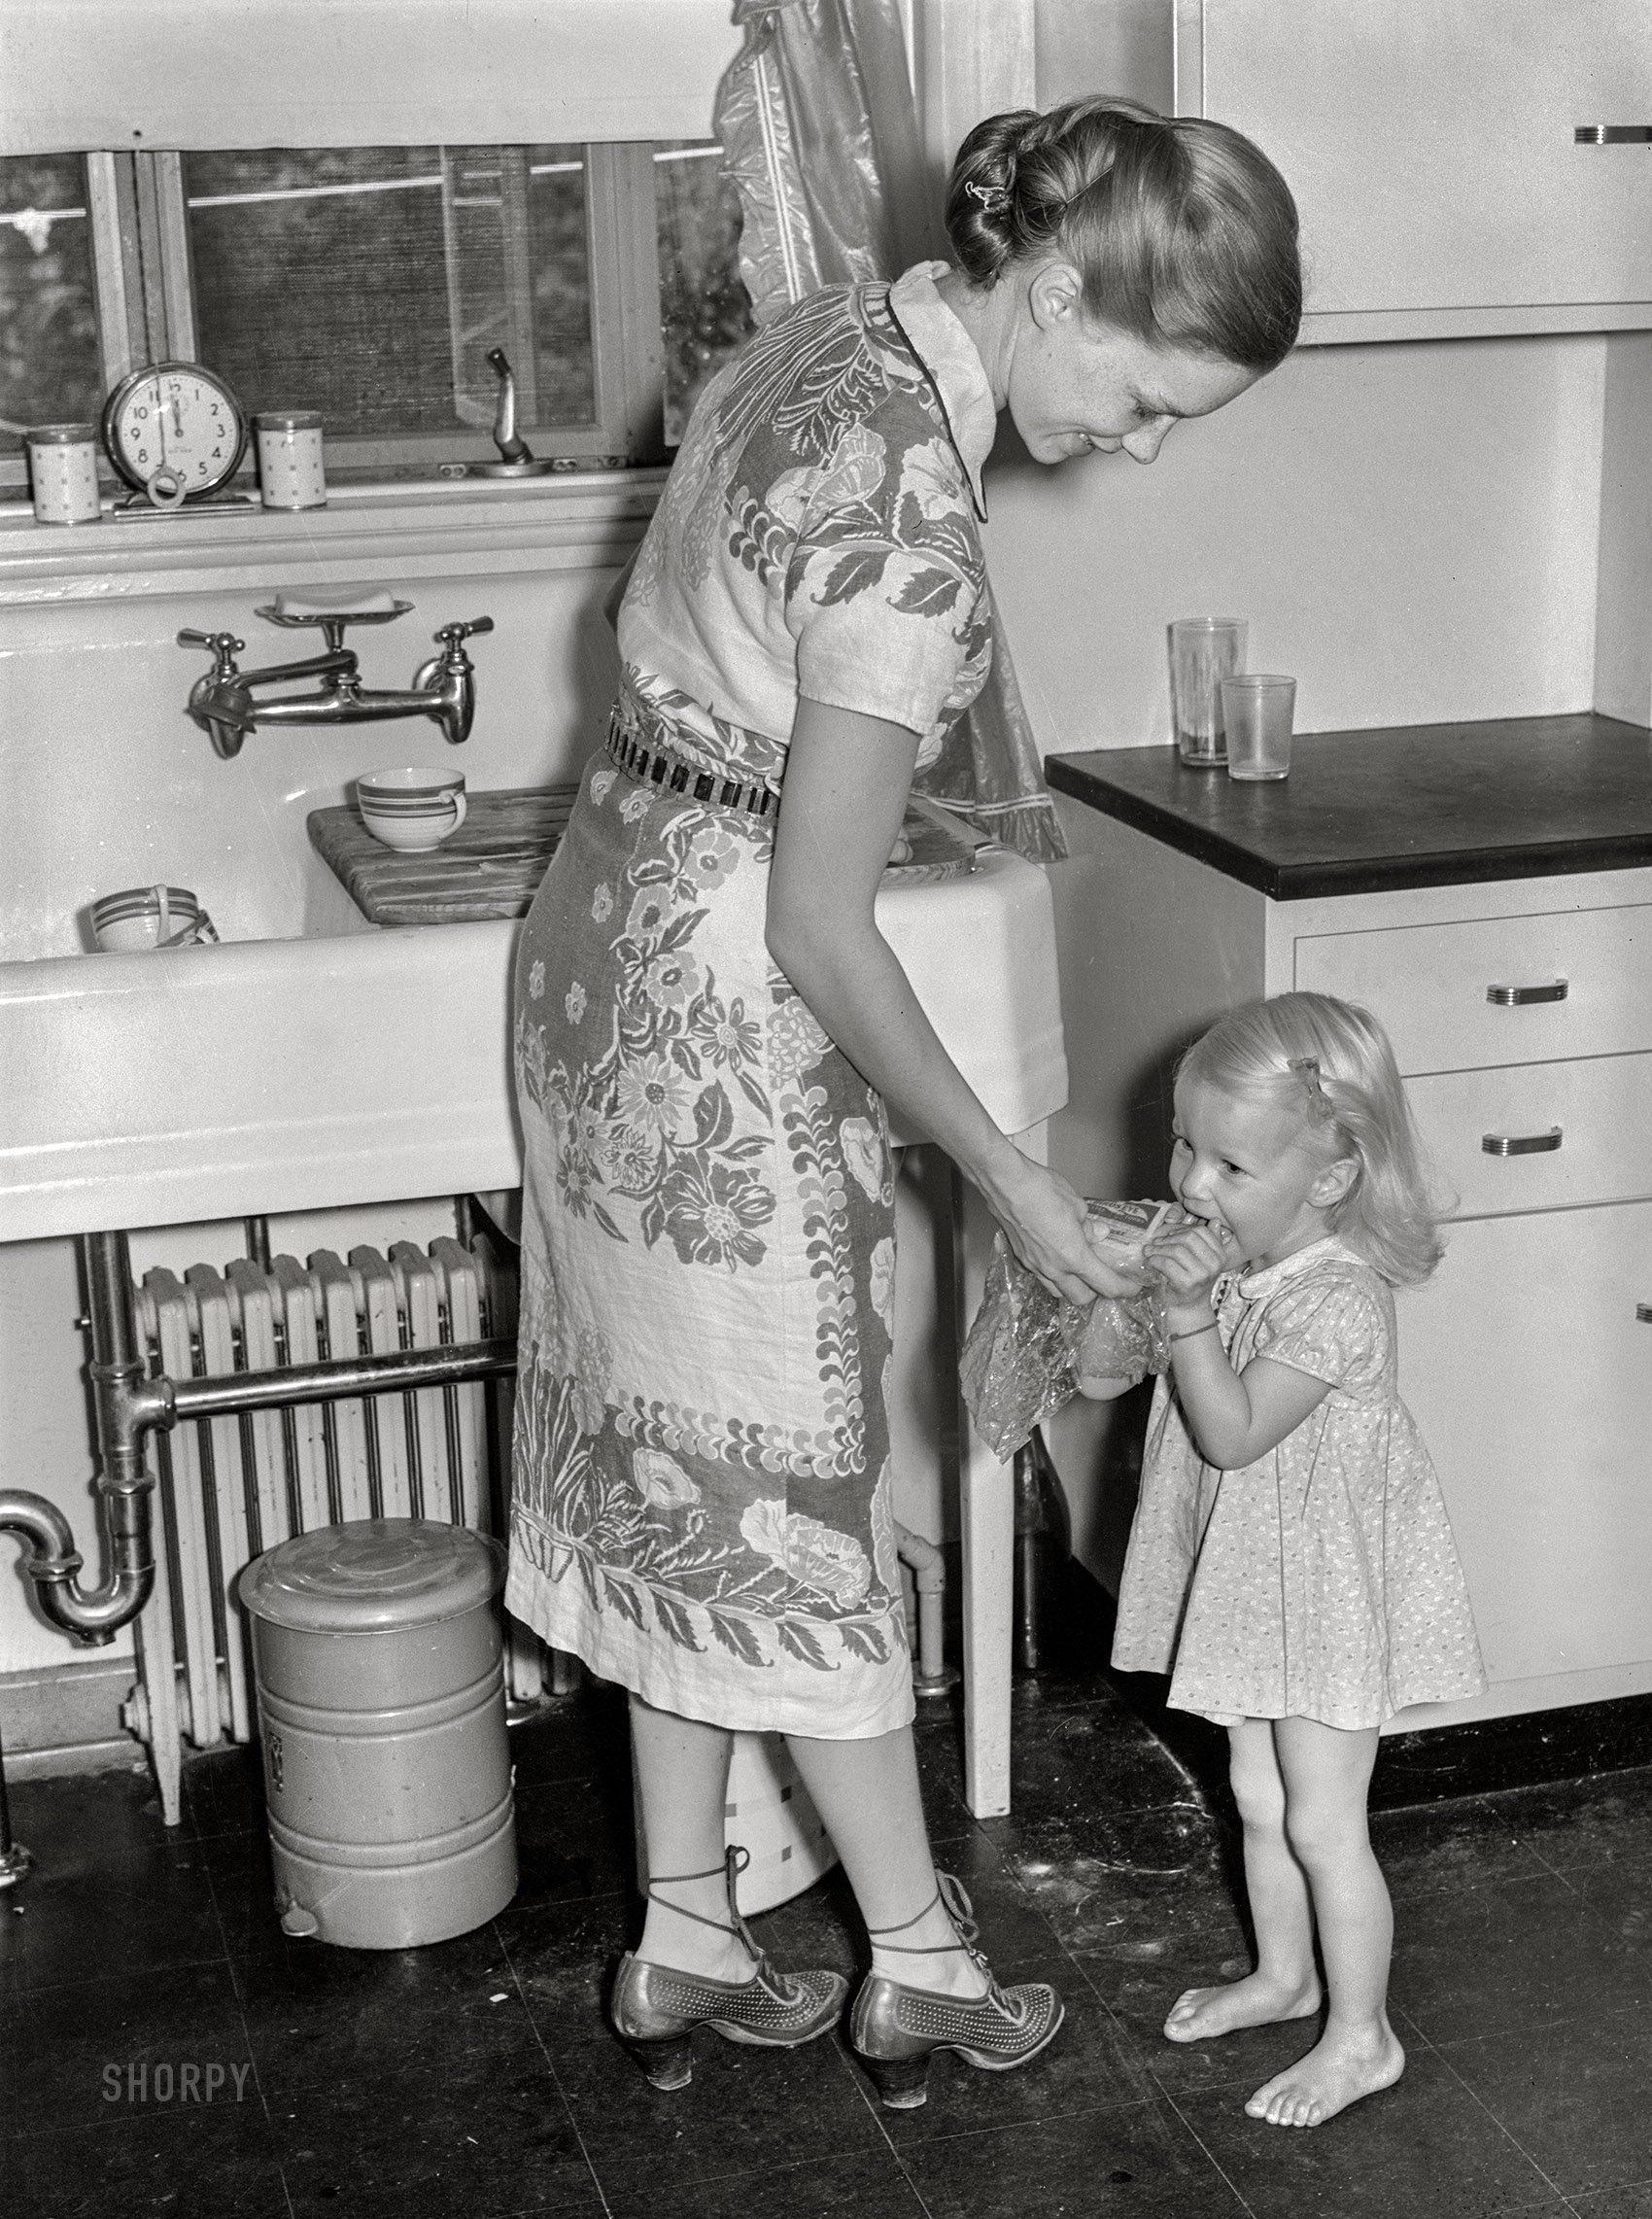 September 1938. "Mrs. Betty Zimmerman and child in kitchen of new home at Greenbelt, Maryland." Medium format acetate negative by Marion Post Wolcott. View full size.